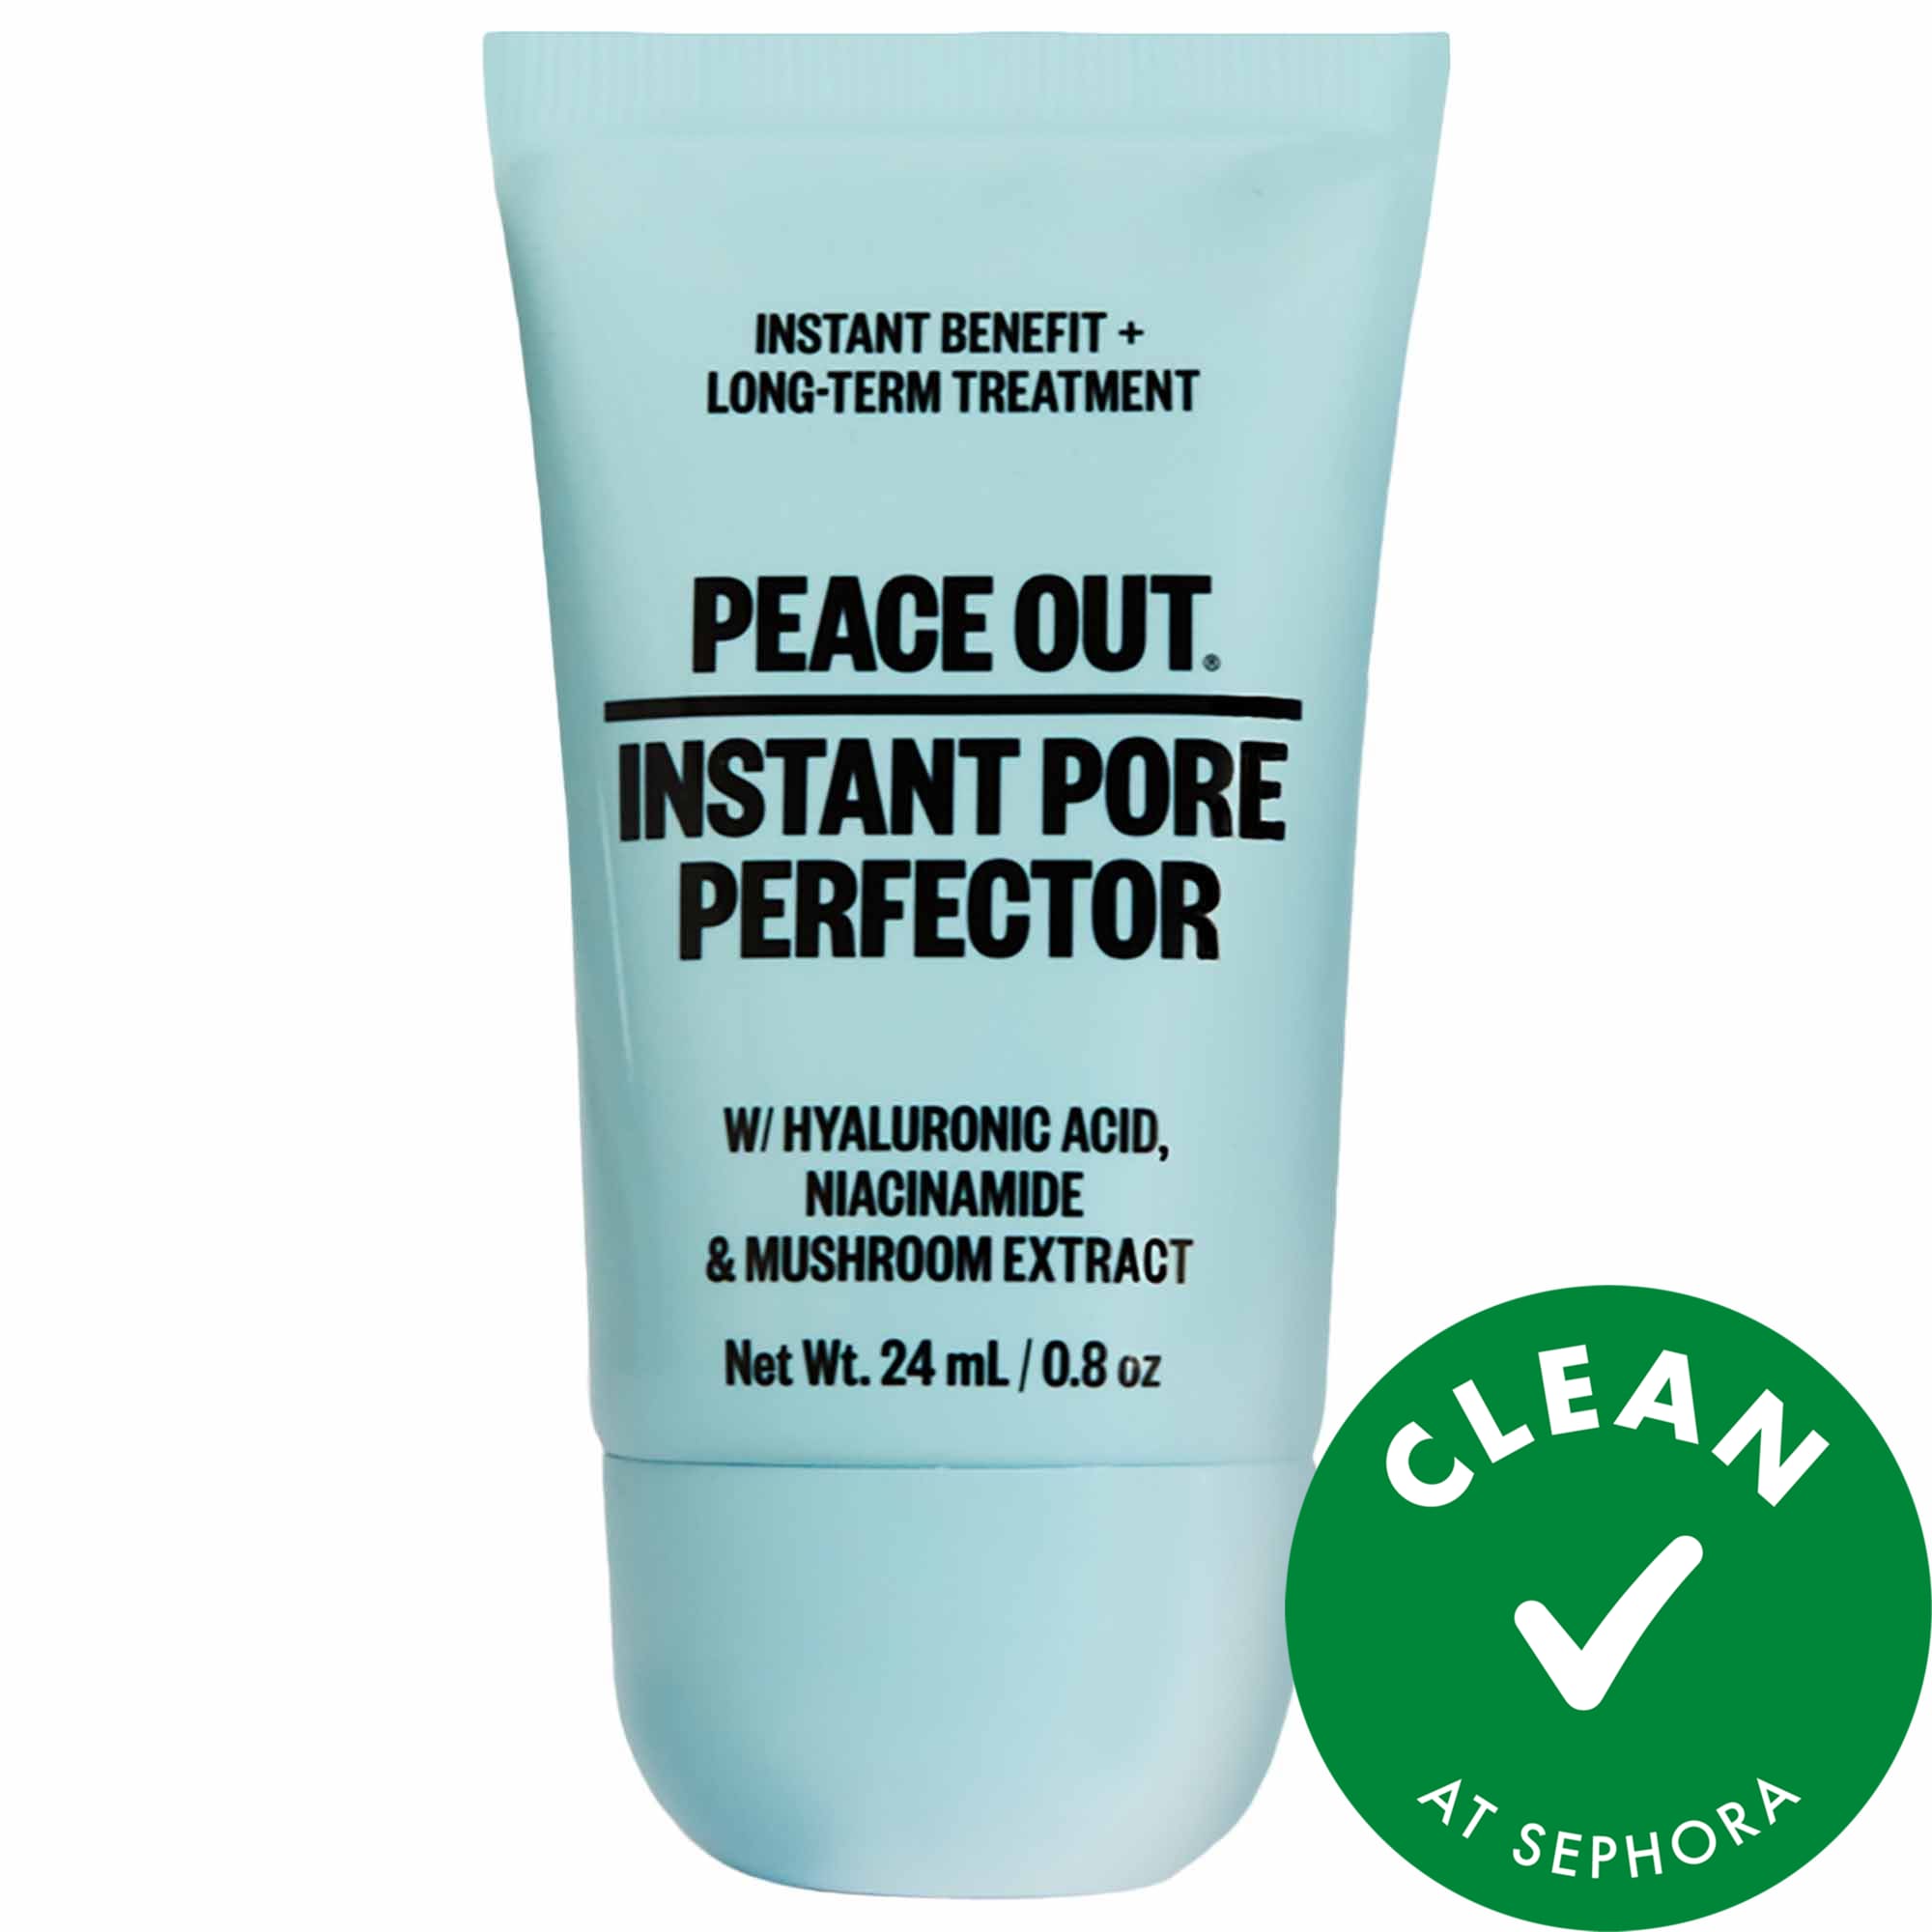 Instant Pore Perfector Peace Out